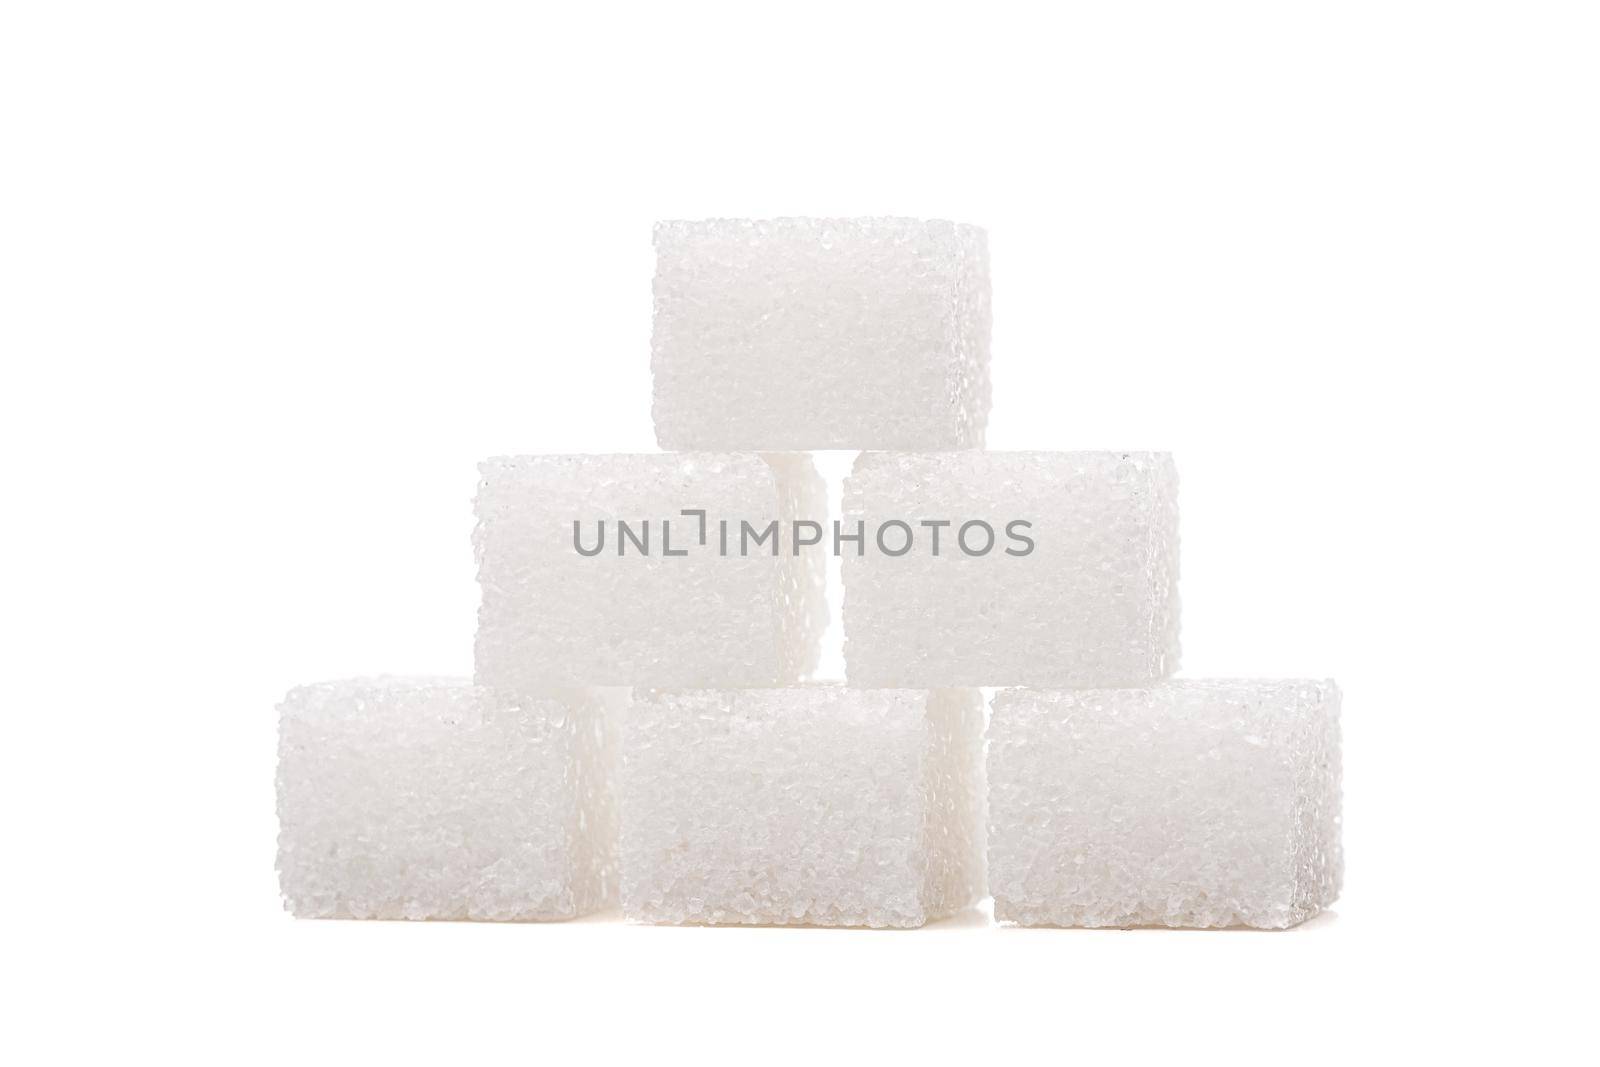 Sugar cubes on one another, isolated on white background